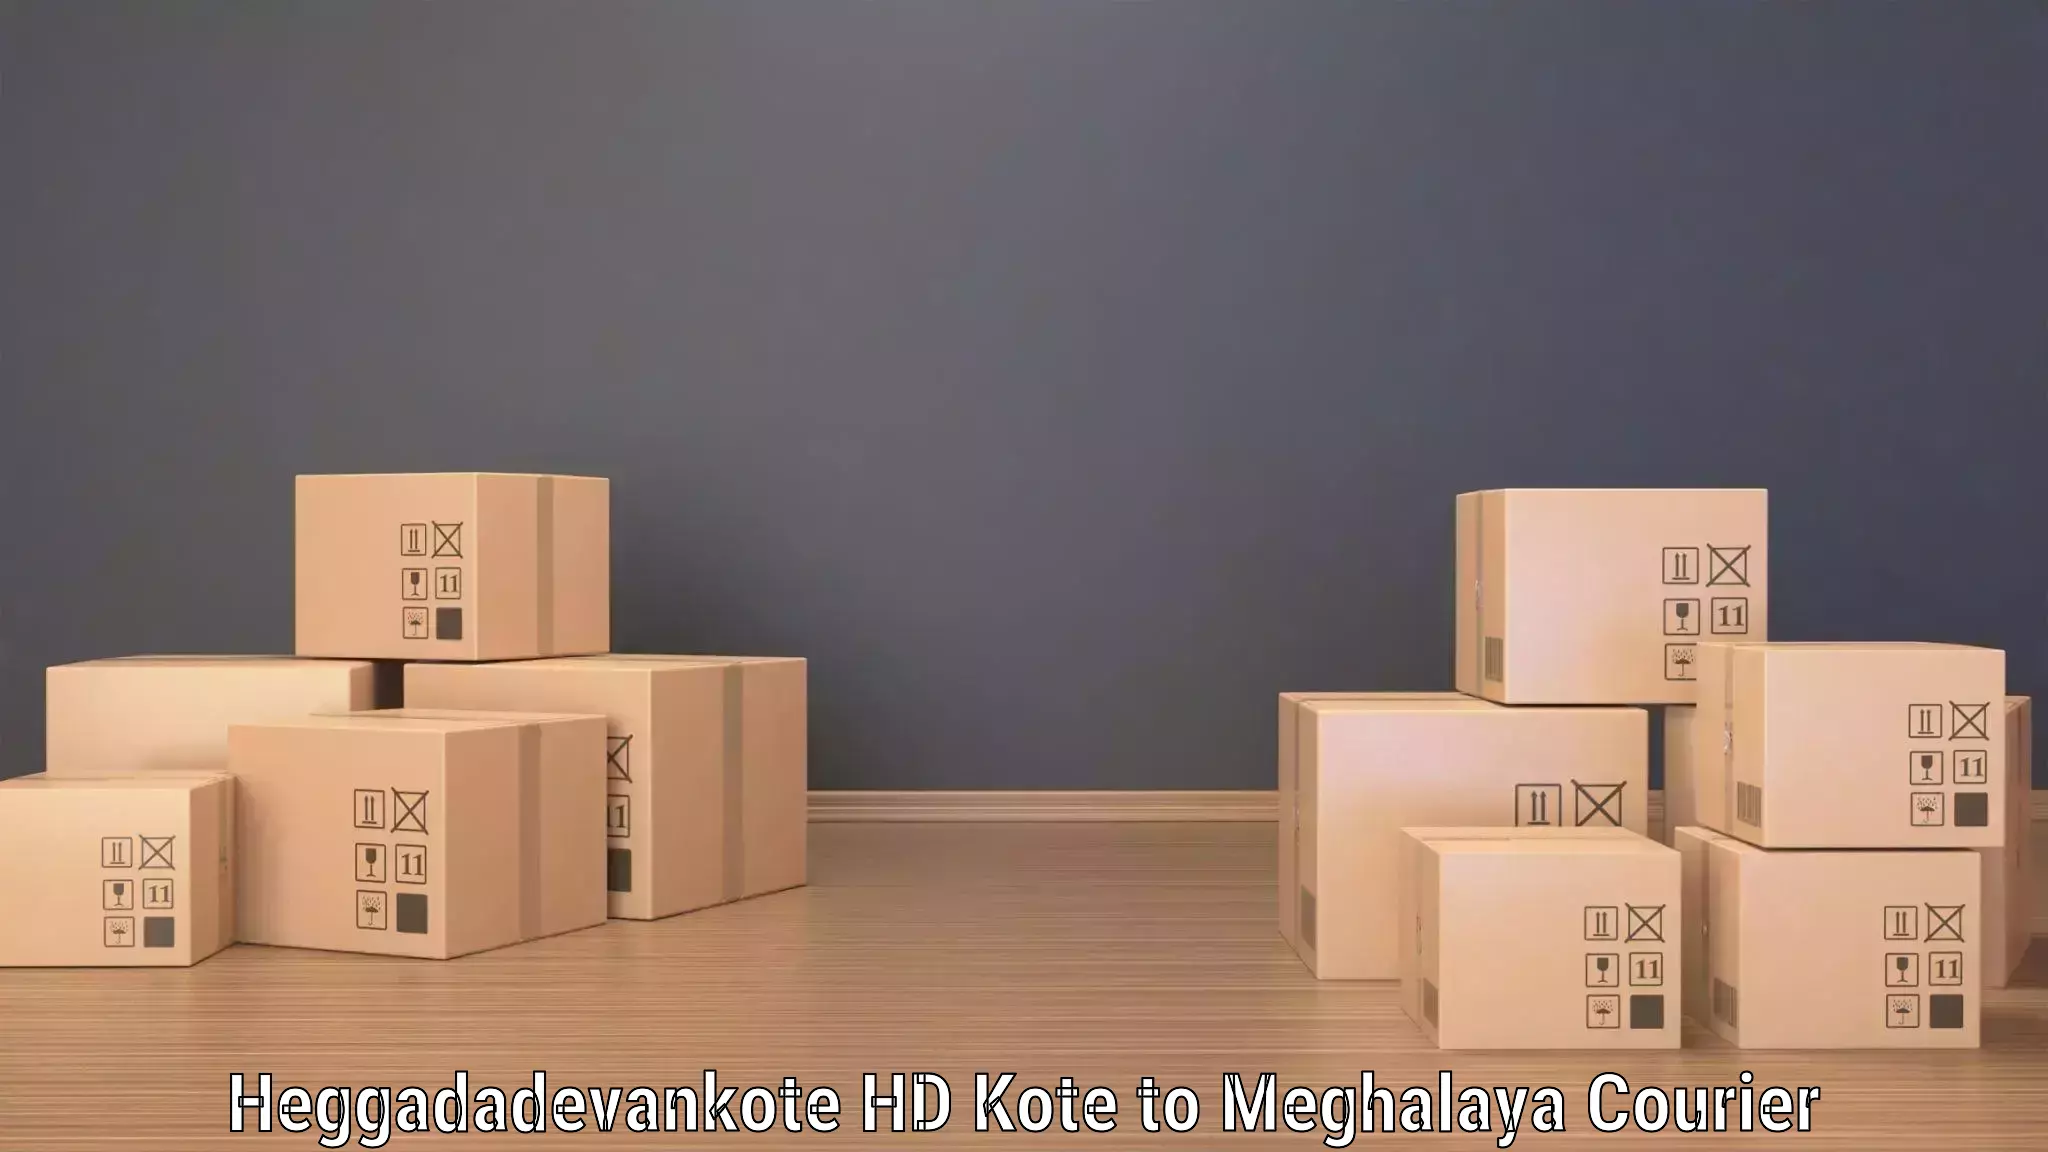 Dynamic courier operations Heggadadevankote HD Kote to Nongpoh